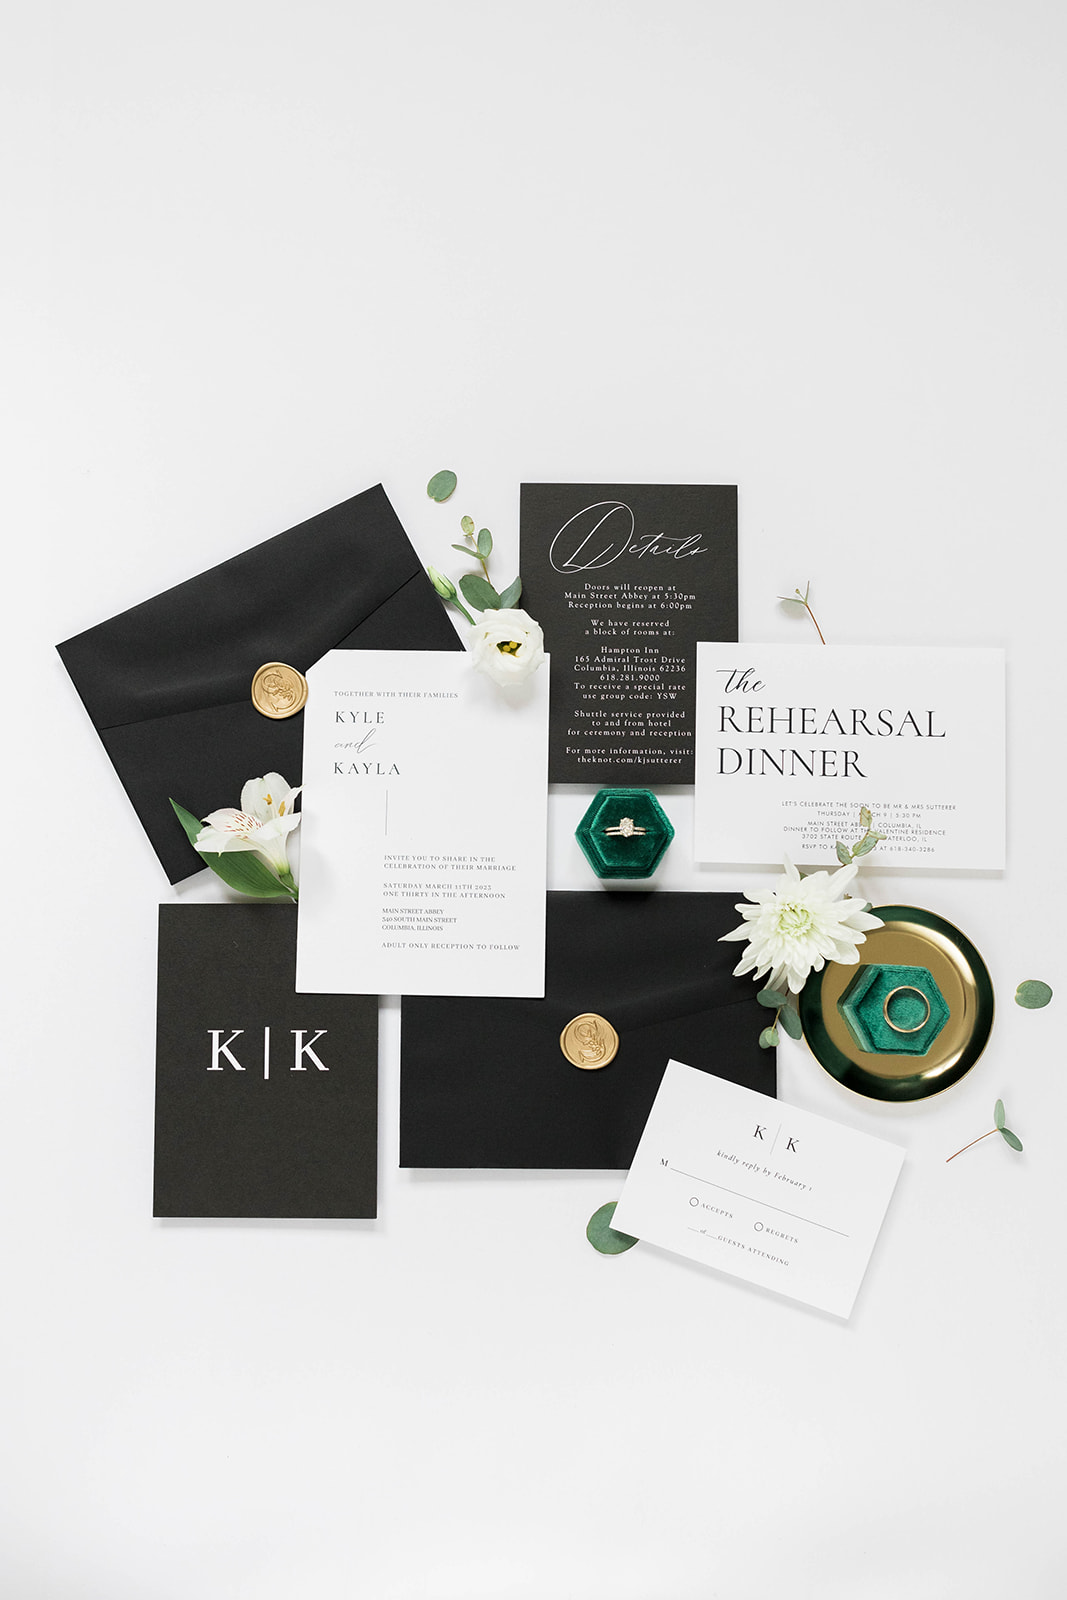 Wedding stationery details with an emerald green color palette